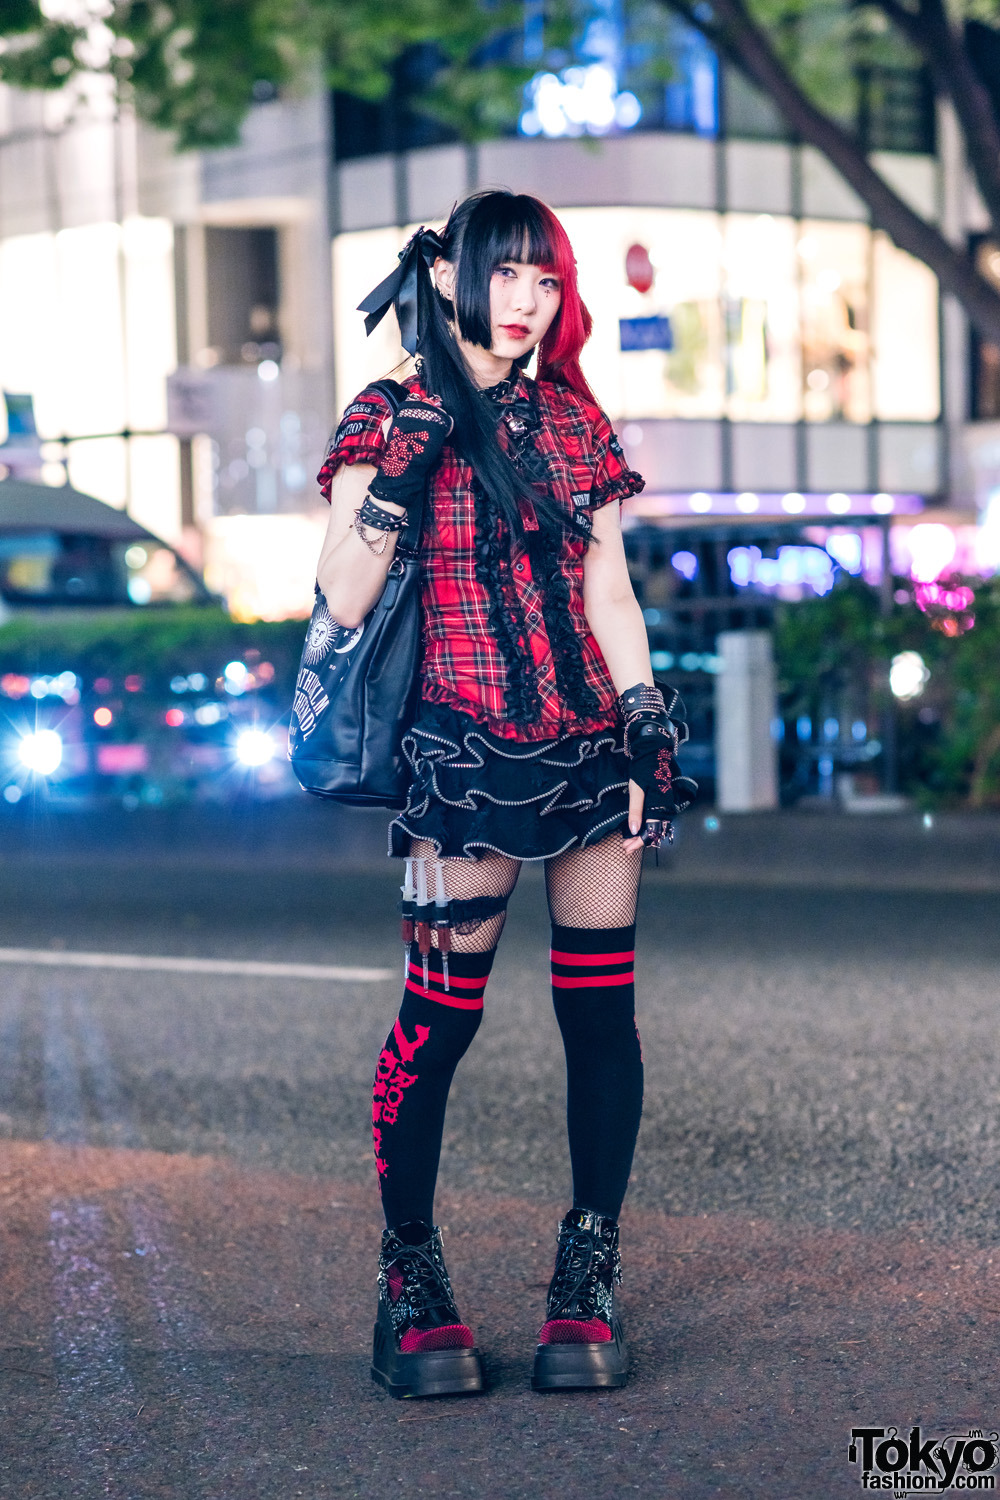 Tokyo Fashion Remon Yesterday Was Her 18th Birthday And Yukachin On The Street In Harajuku